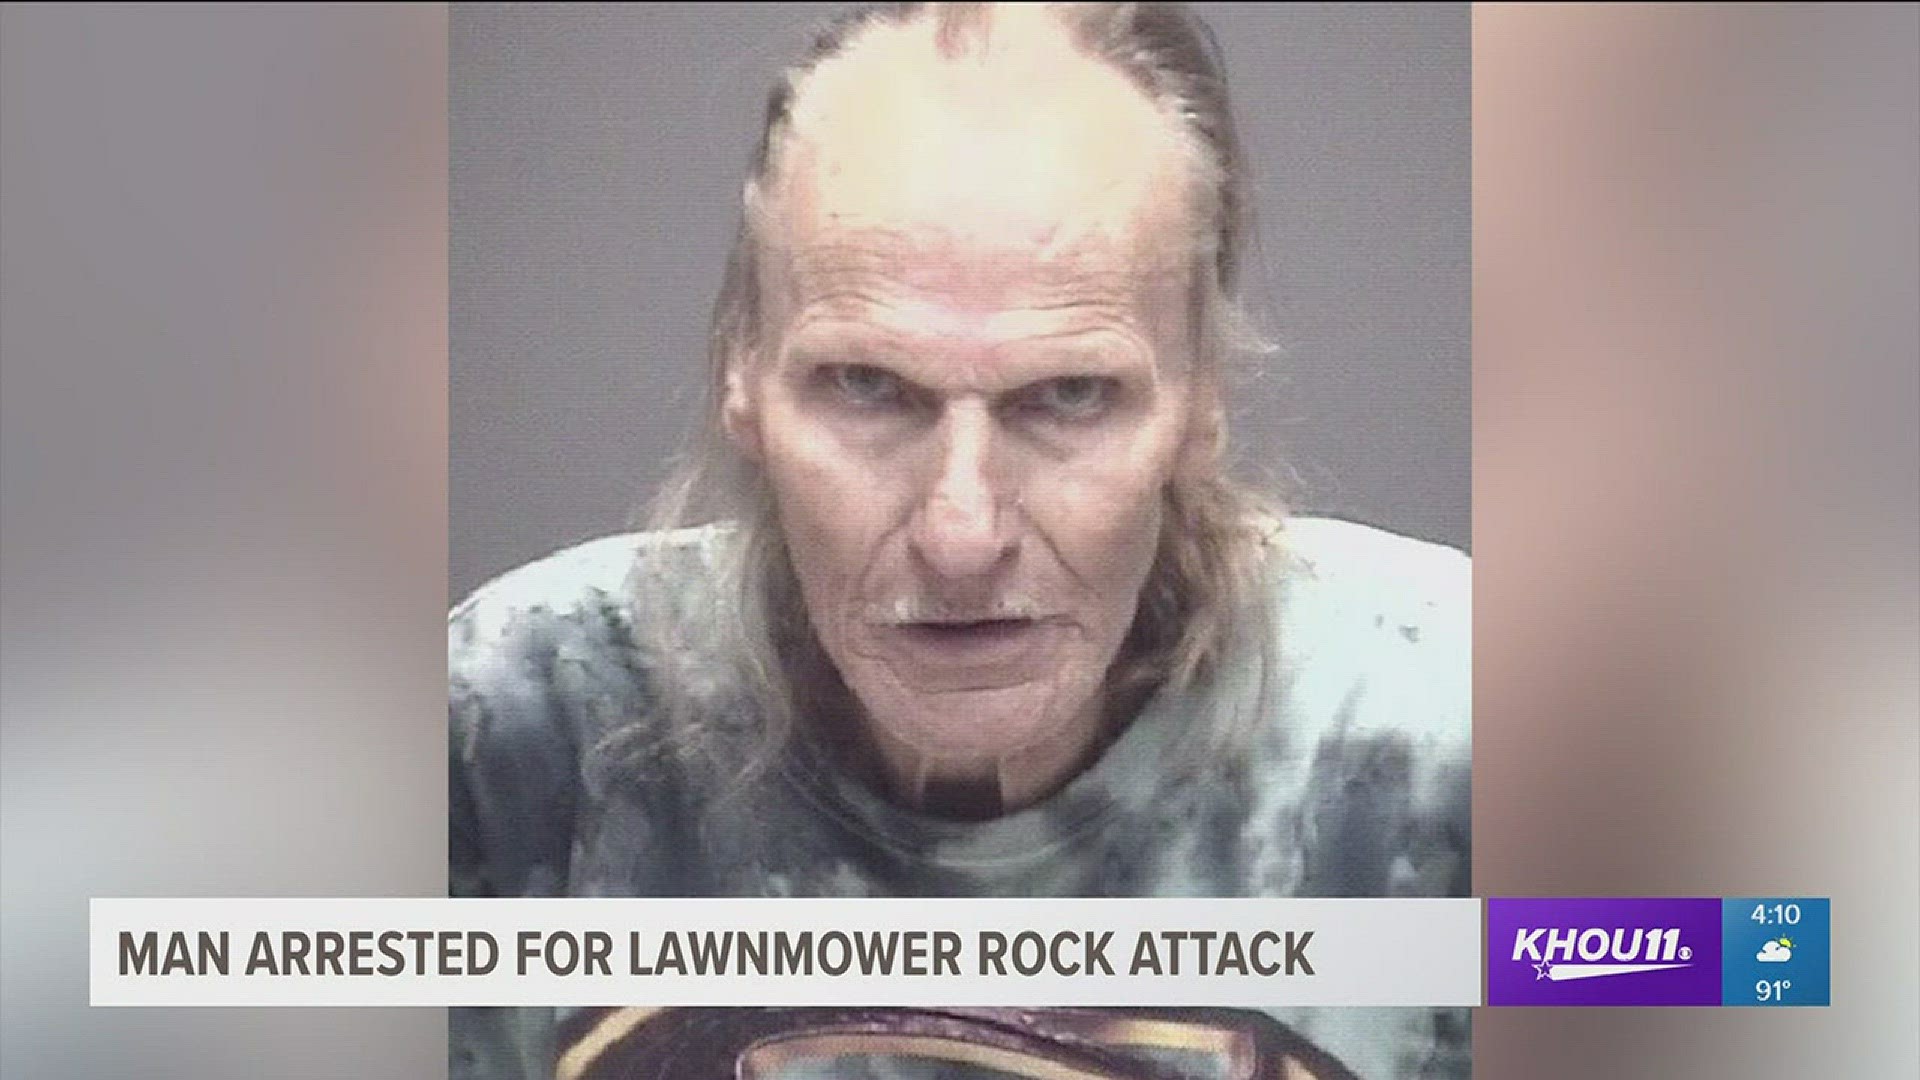 A man in Galveston County was arrested for attacking his roommate's ex husband by using his riding lawn mower to throw rocks at the woman's ex and damage his vehicle.